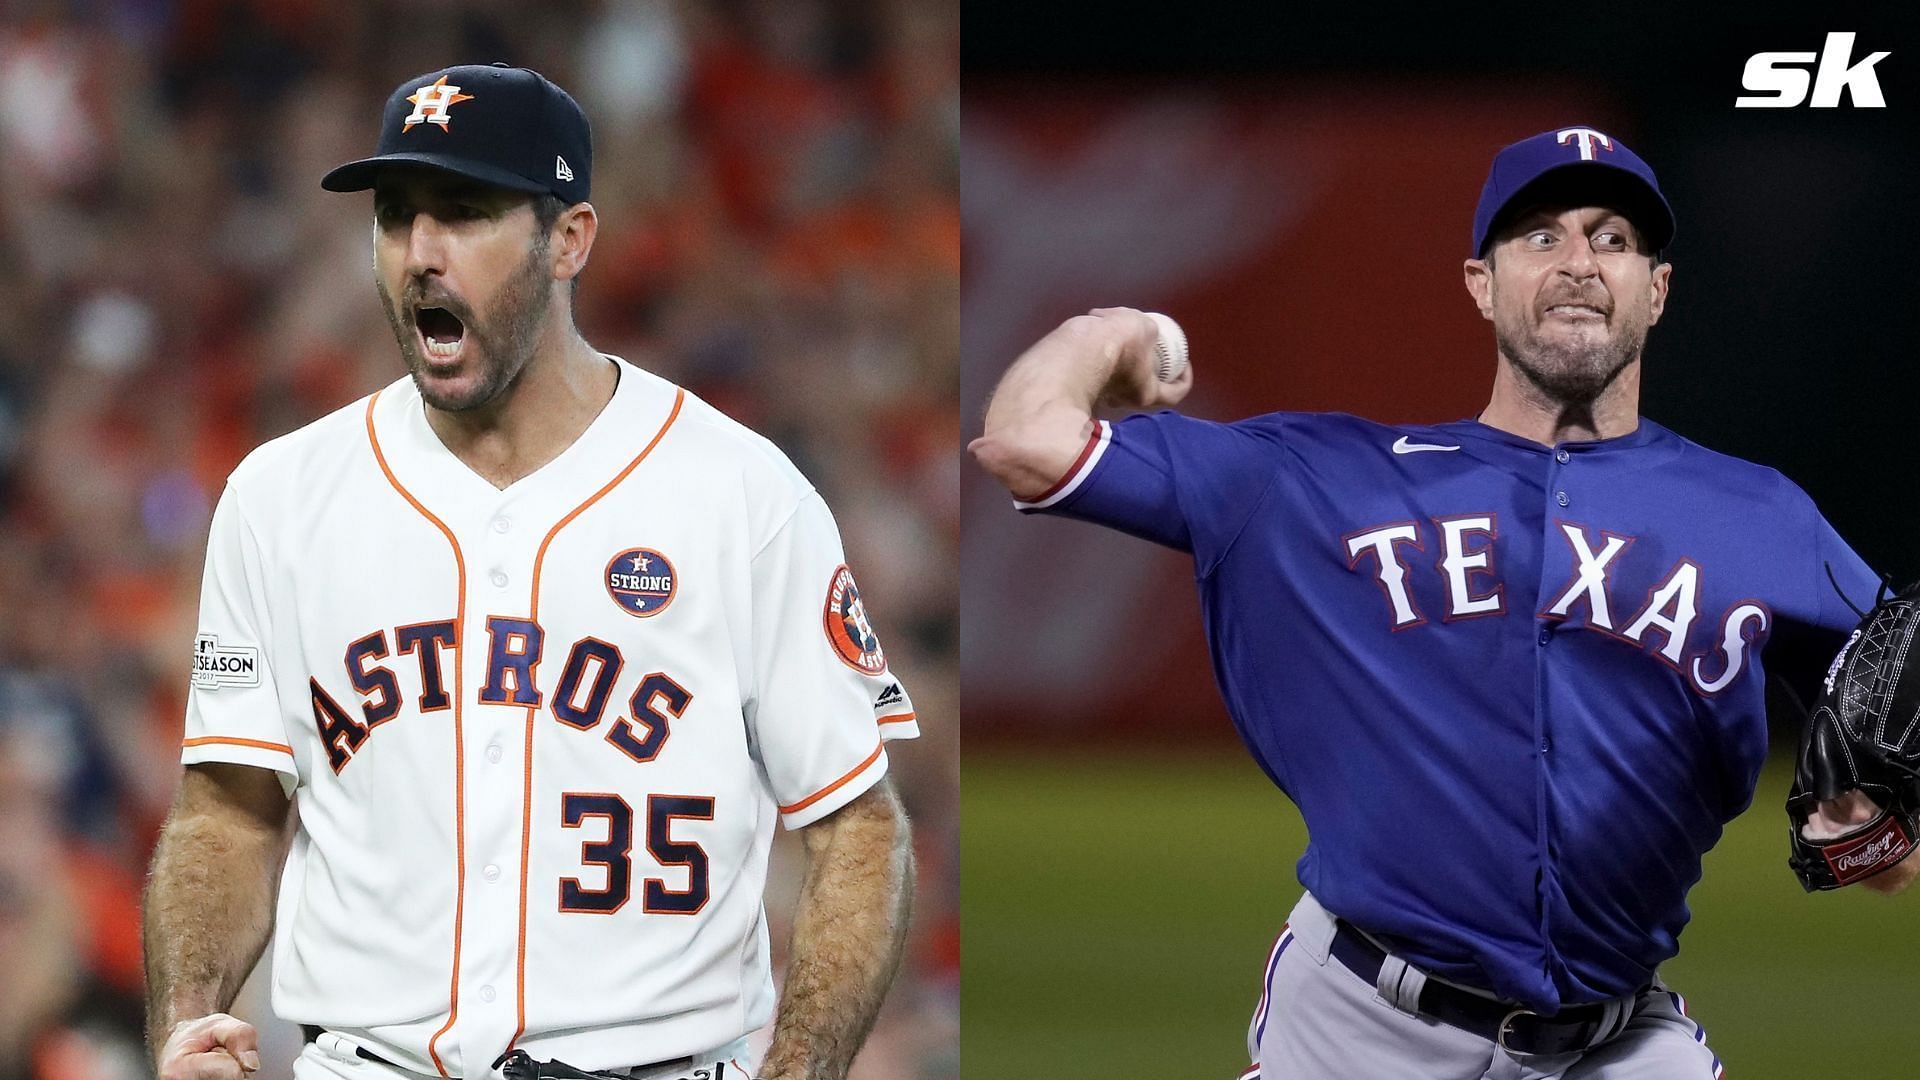 Astros-Rangers benches clear: Houston vs. Texas series finale